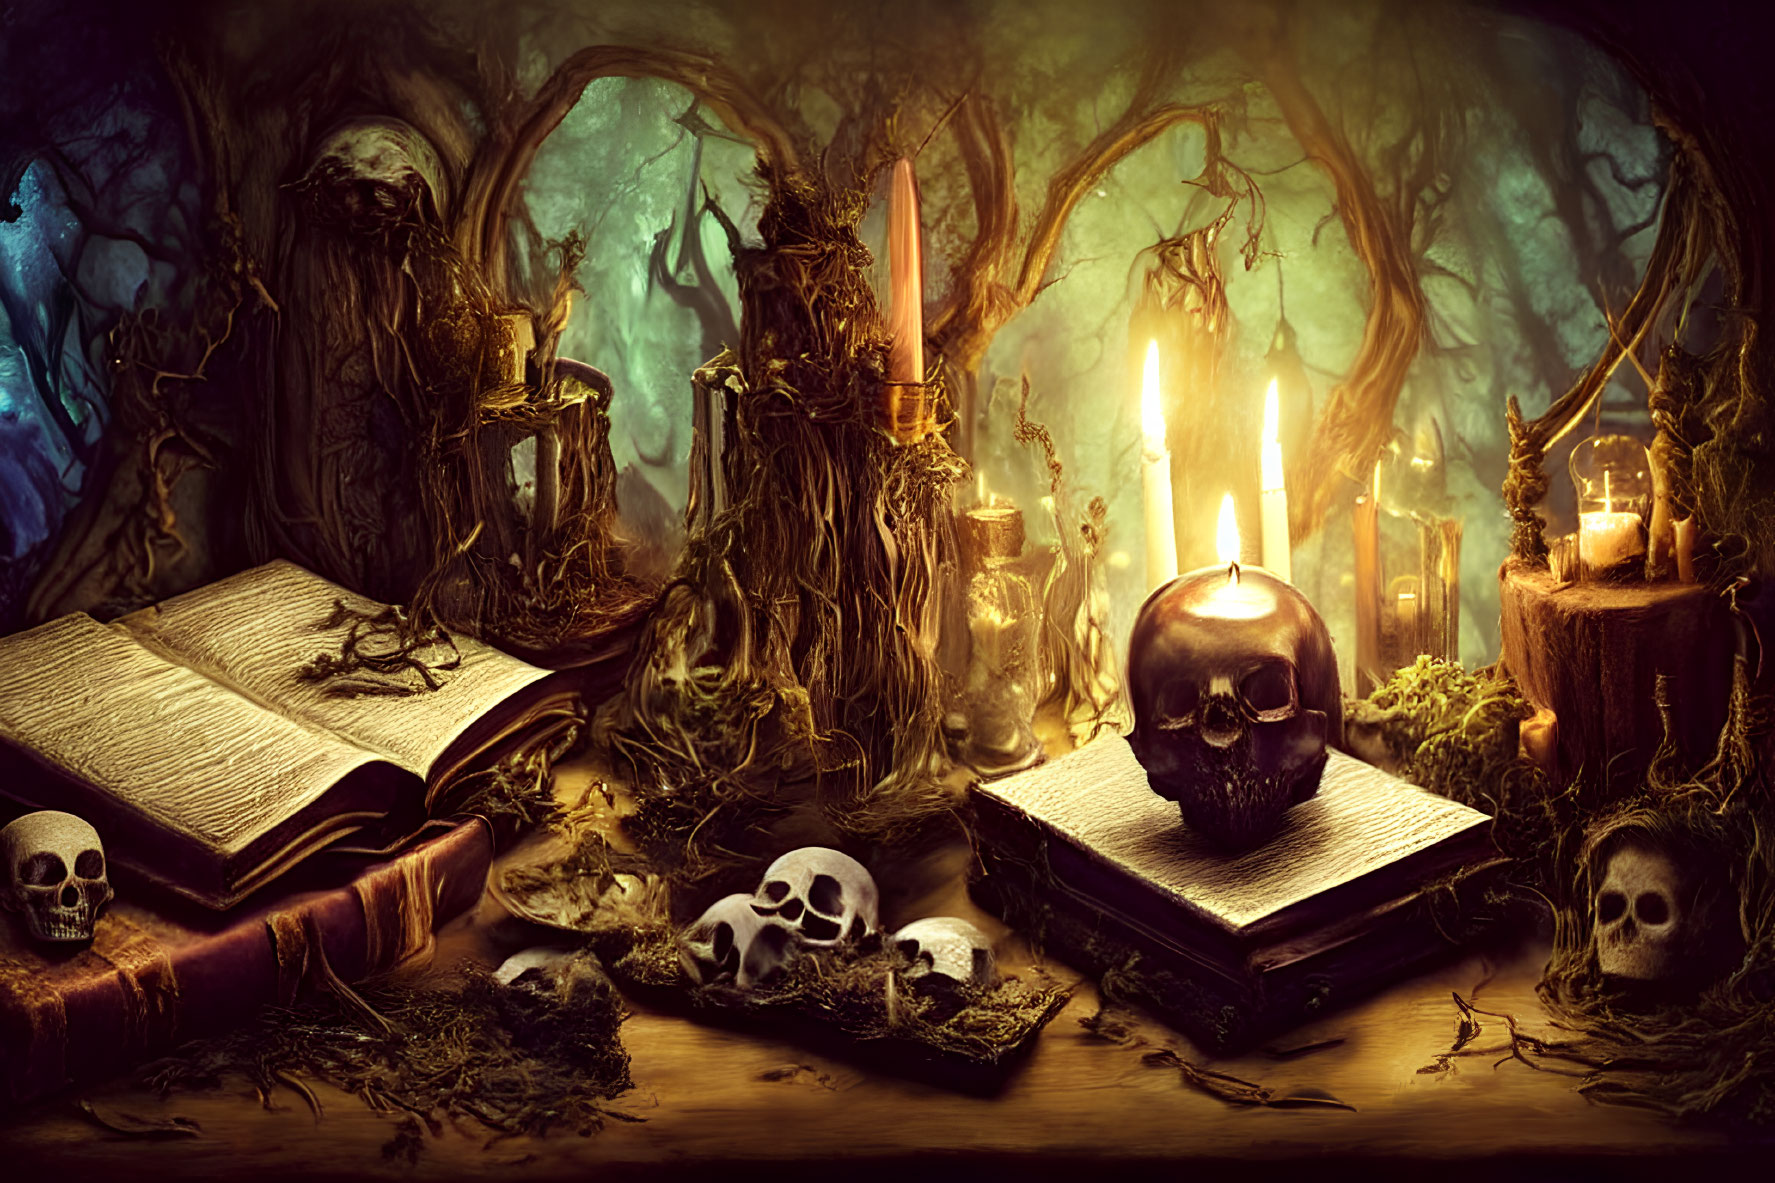 Mystical forest scene with ancient books, candles, skulls, and twisted branches